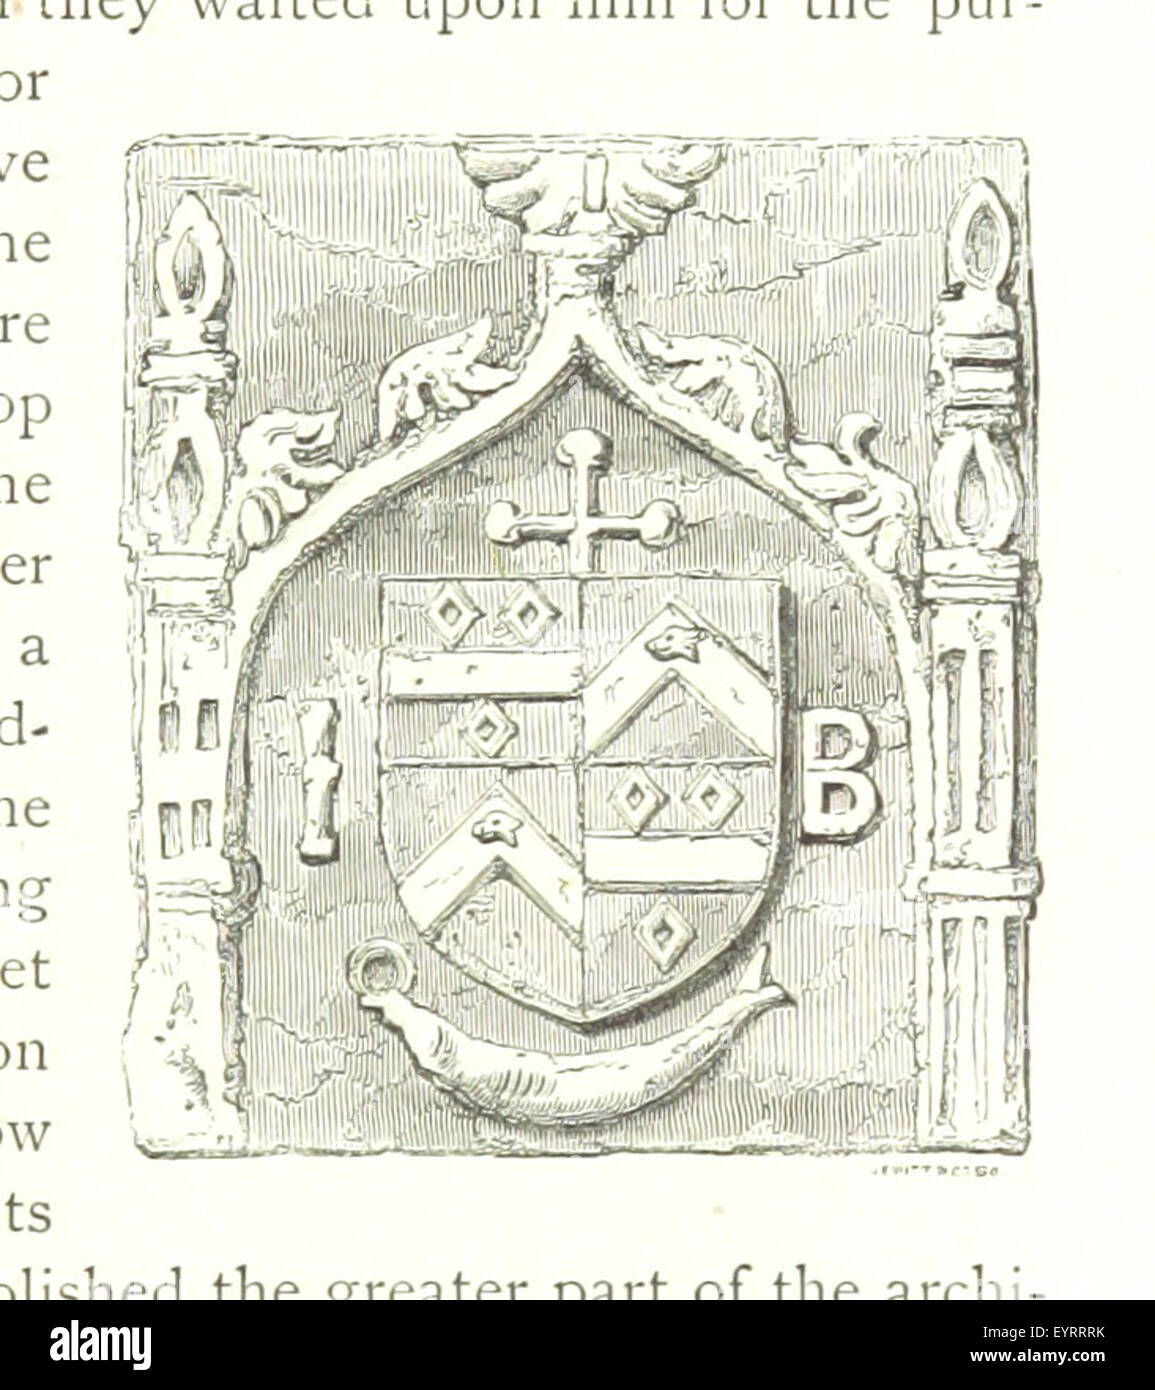 Image taken from page 137 of '[Old Glasgow: the place and the people. From the Roman occupation to the eighteenth century. L.P.]' Image taken from page 137 of '[Old Glasgow the place Stock Photo